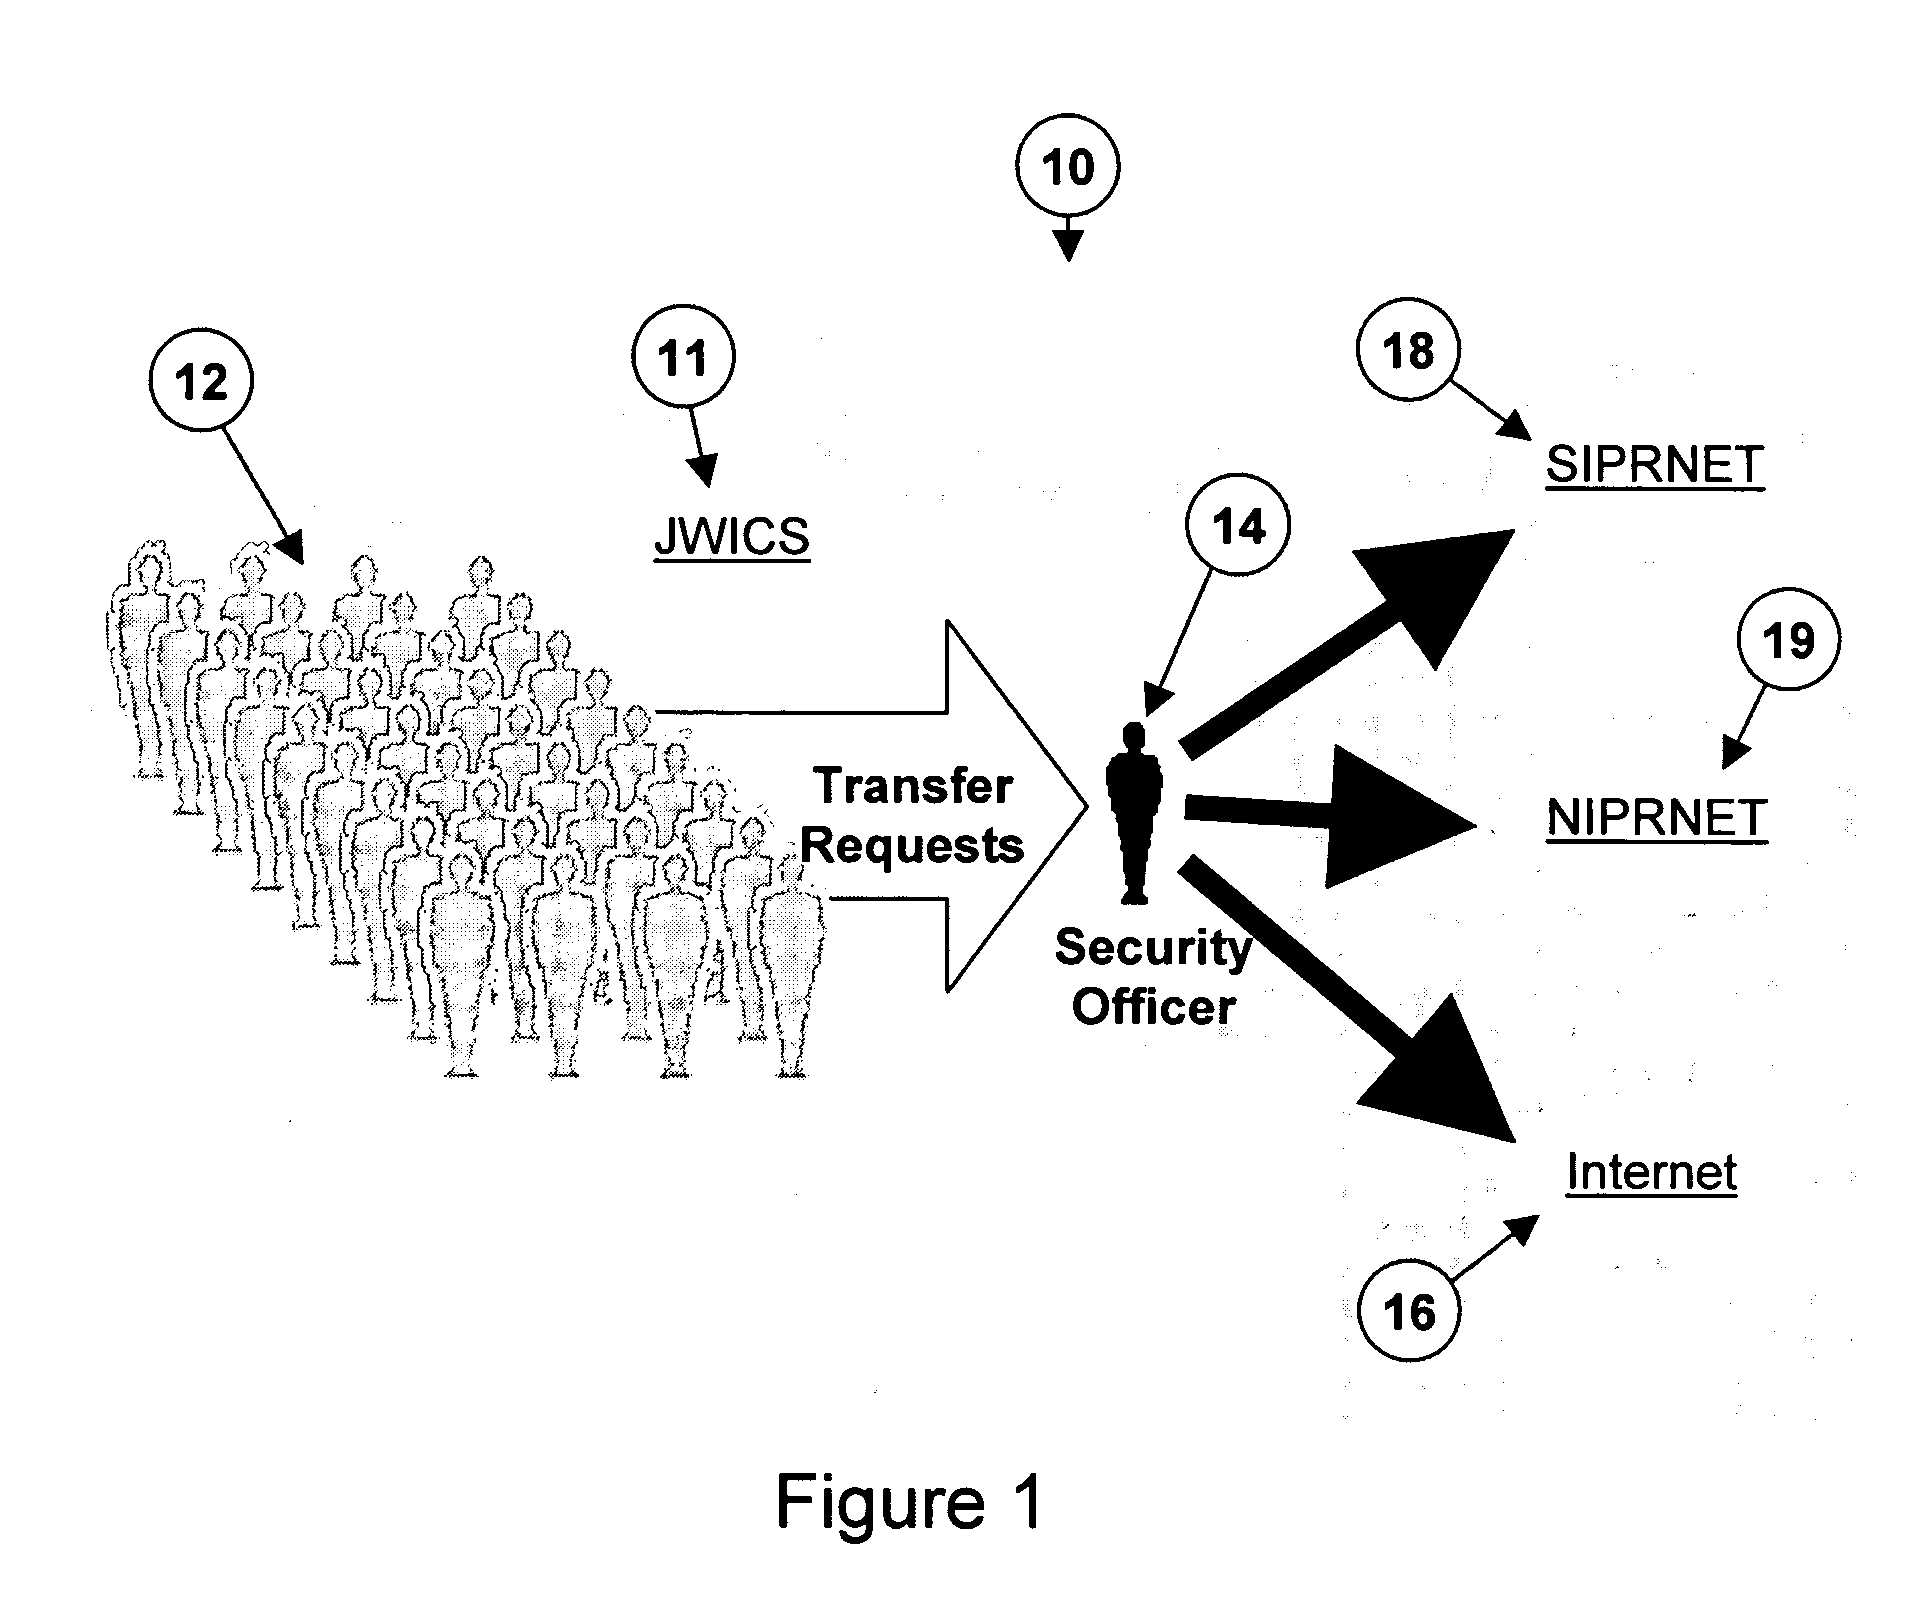 System and method for detecting, analyzing and controlling hidden data embedded in computer files